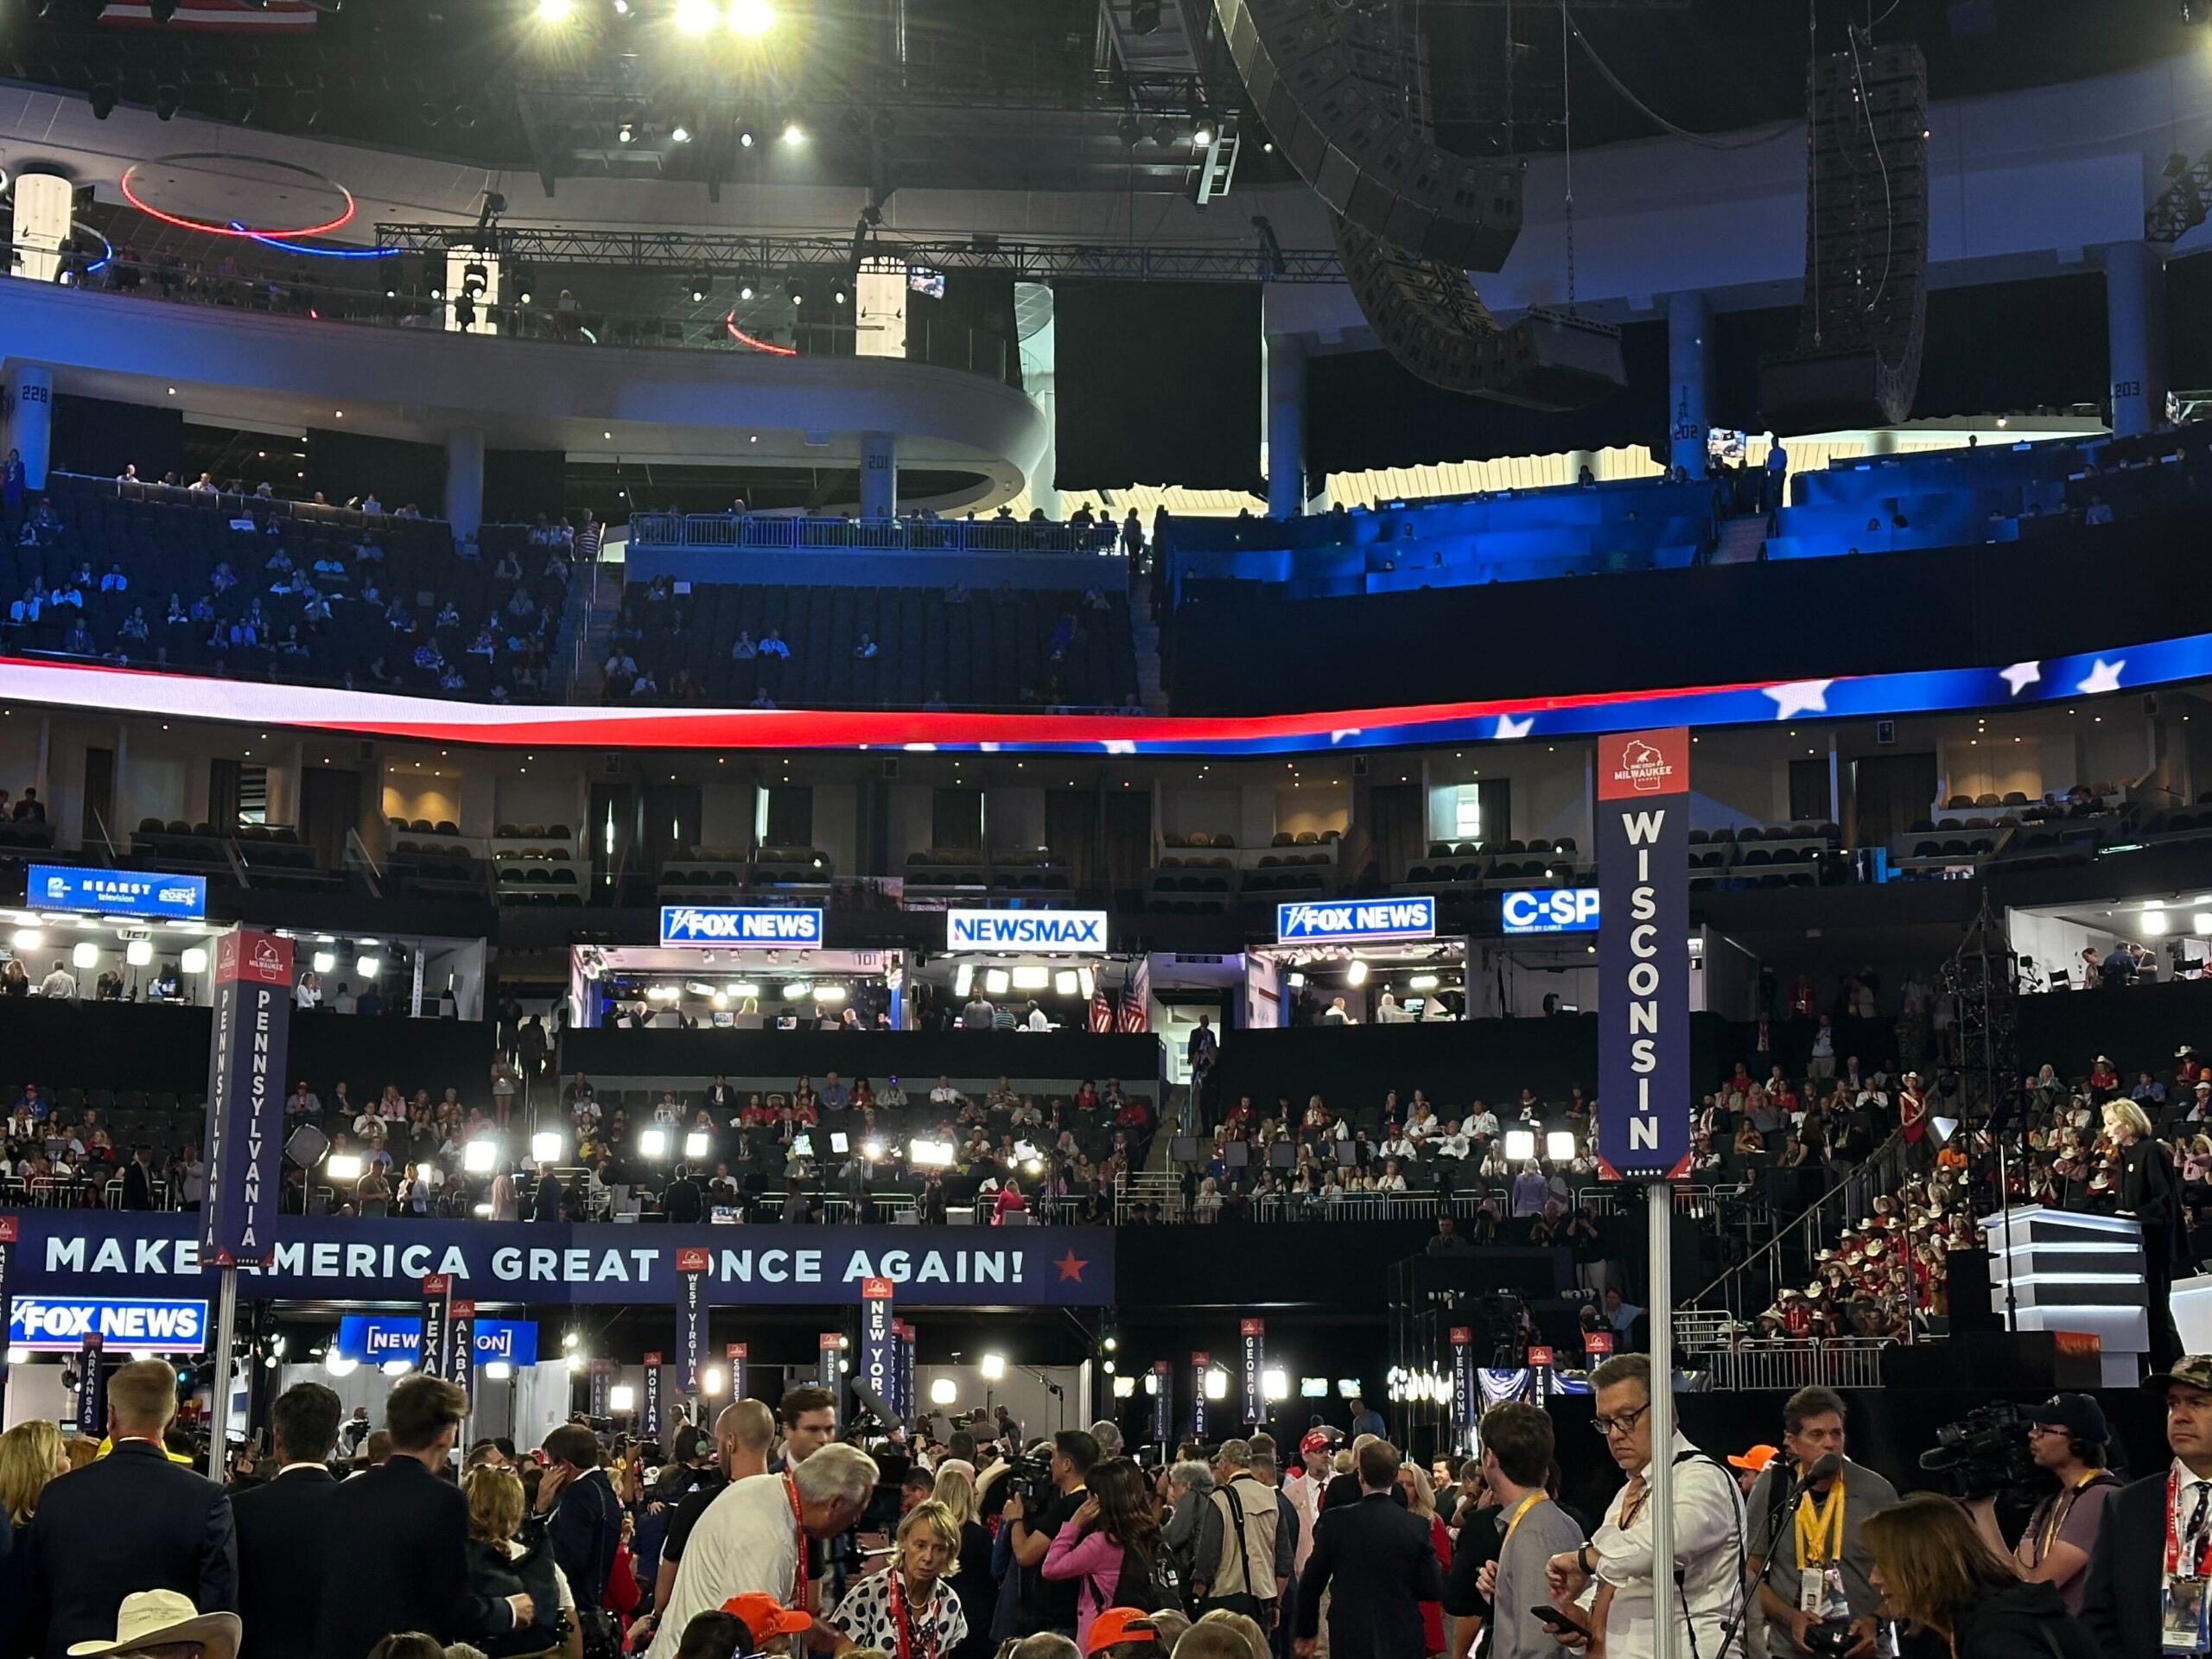 At RNC, Wisconsin GOP leaders tell delegates to have a seat